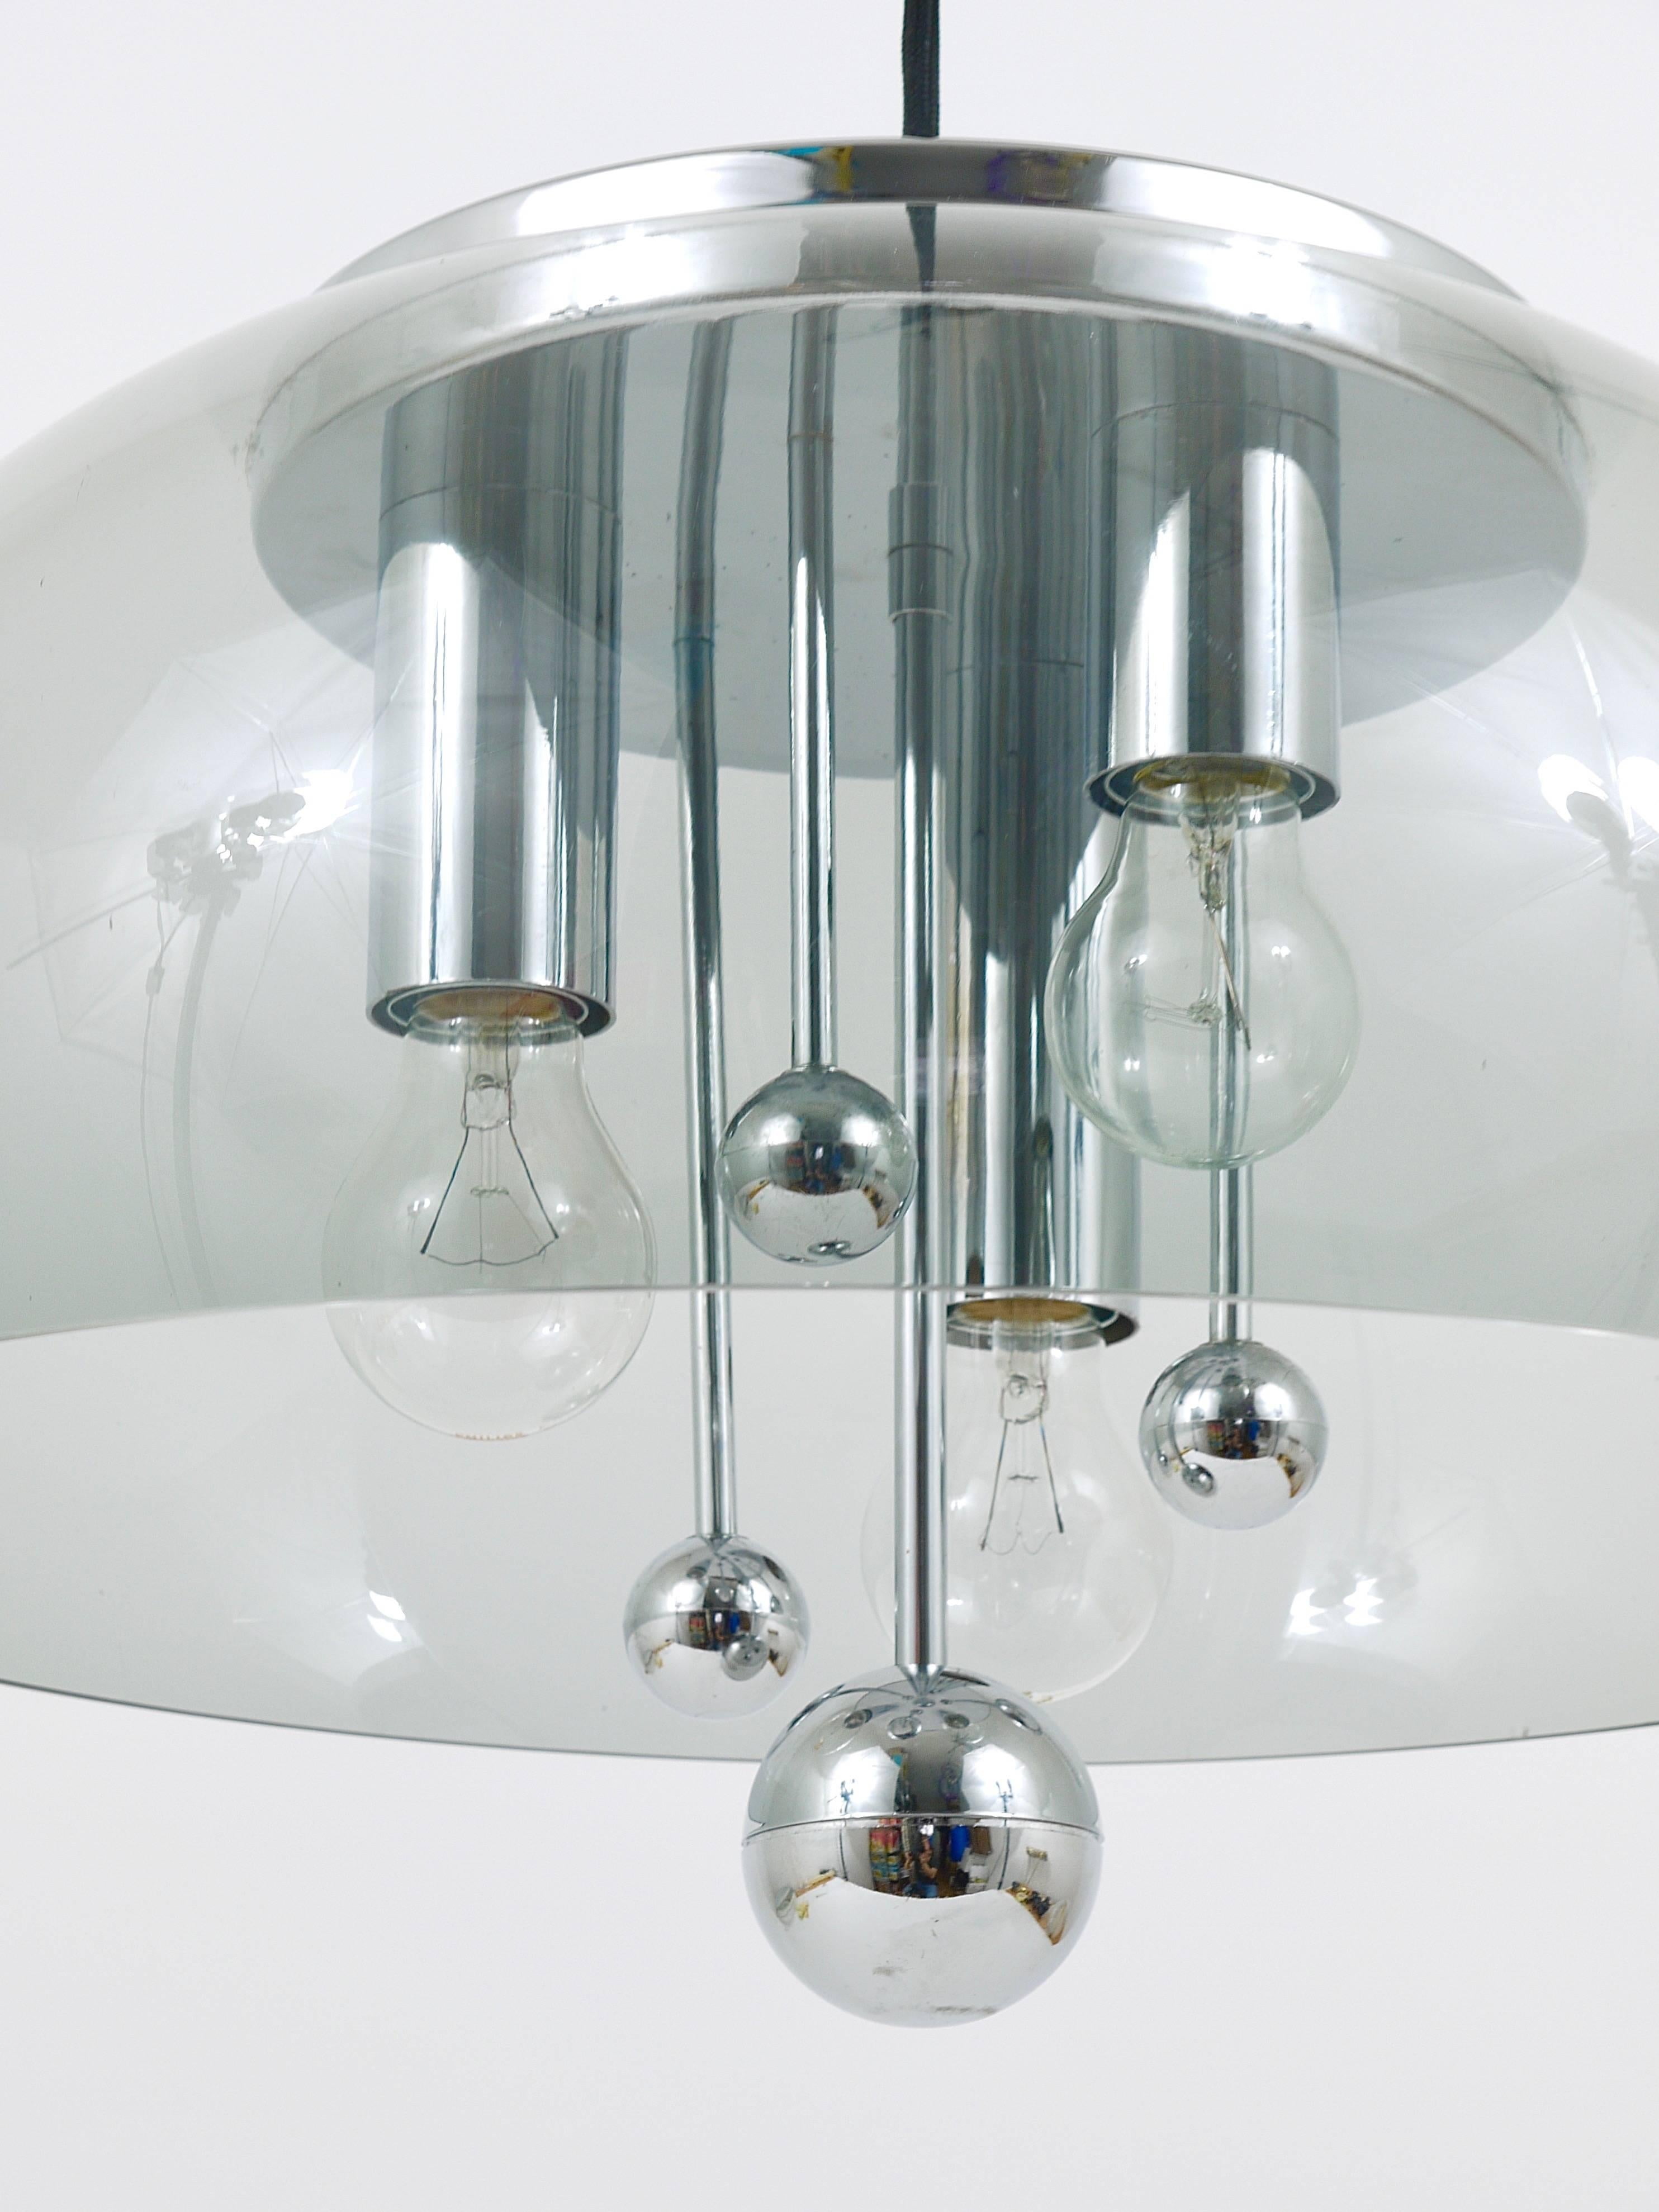 Midcentury Space Age Globe Pendant Lamp with Chromed Spheres, Germany, 1970s For Sale 8